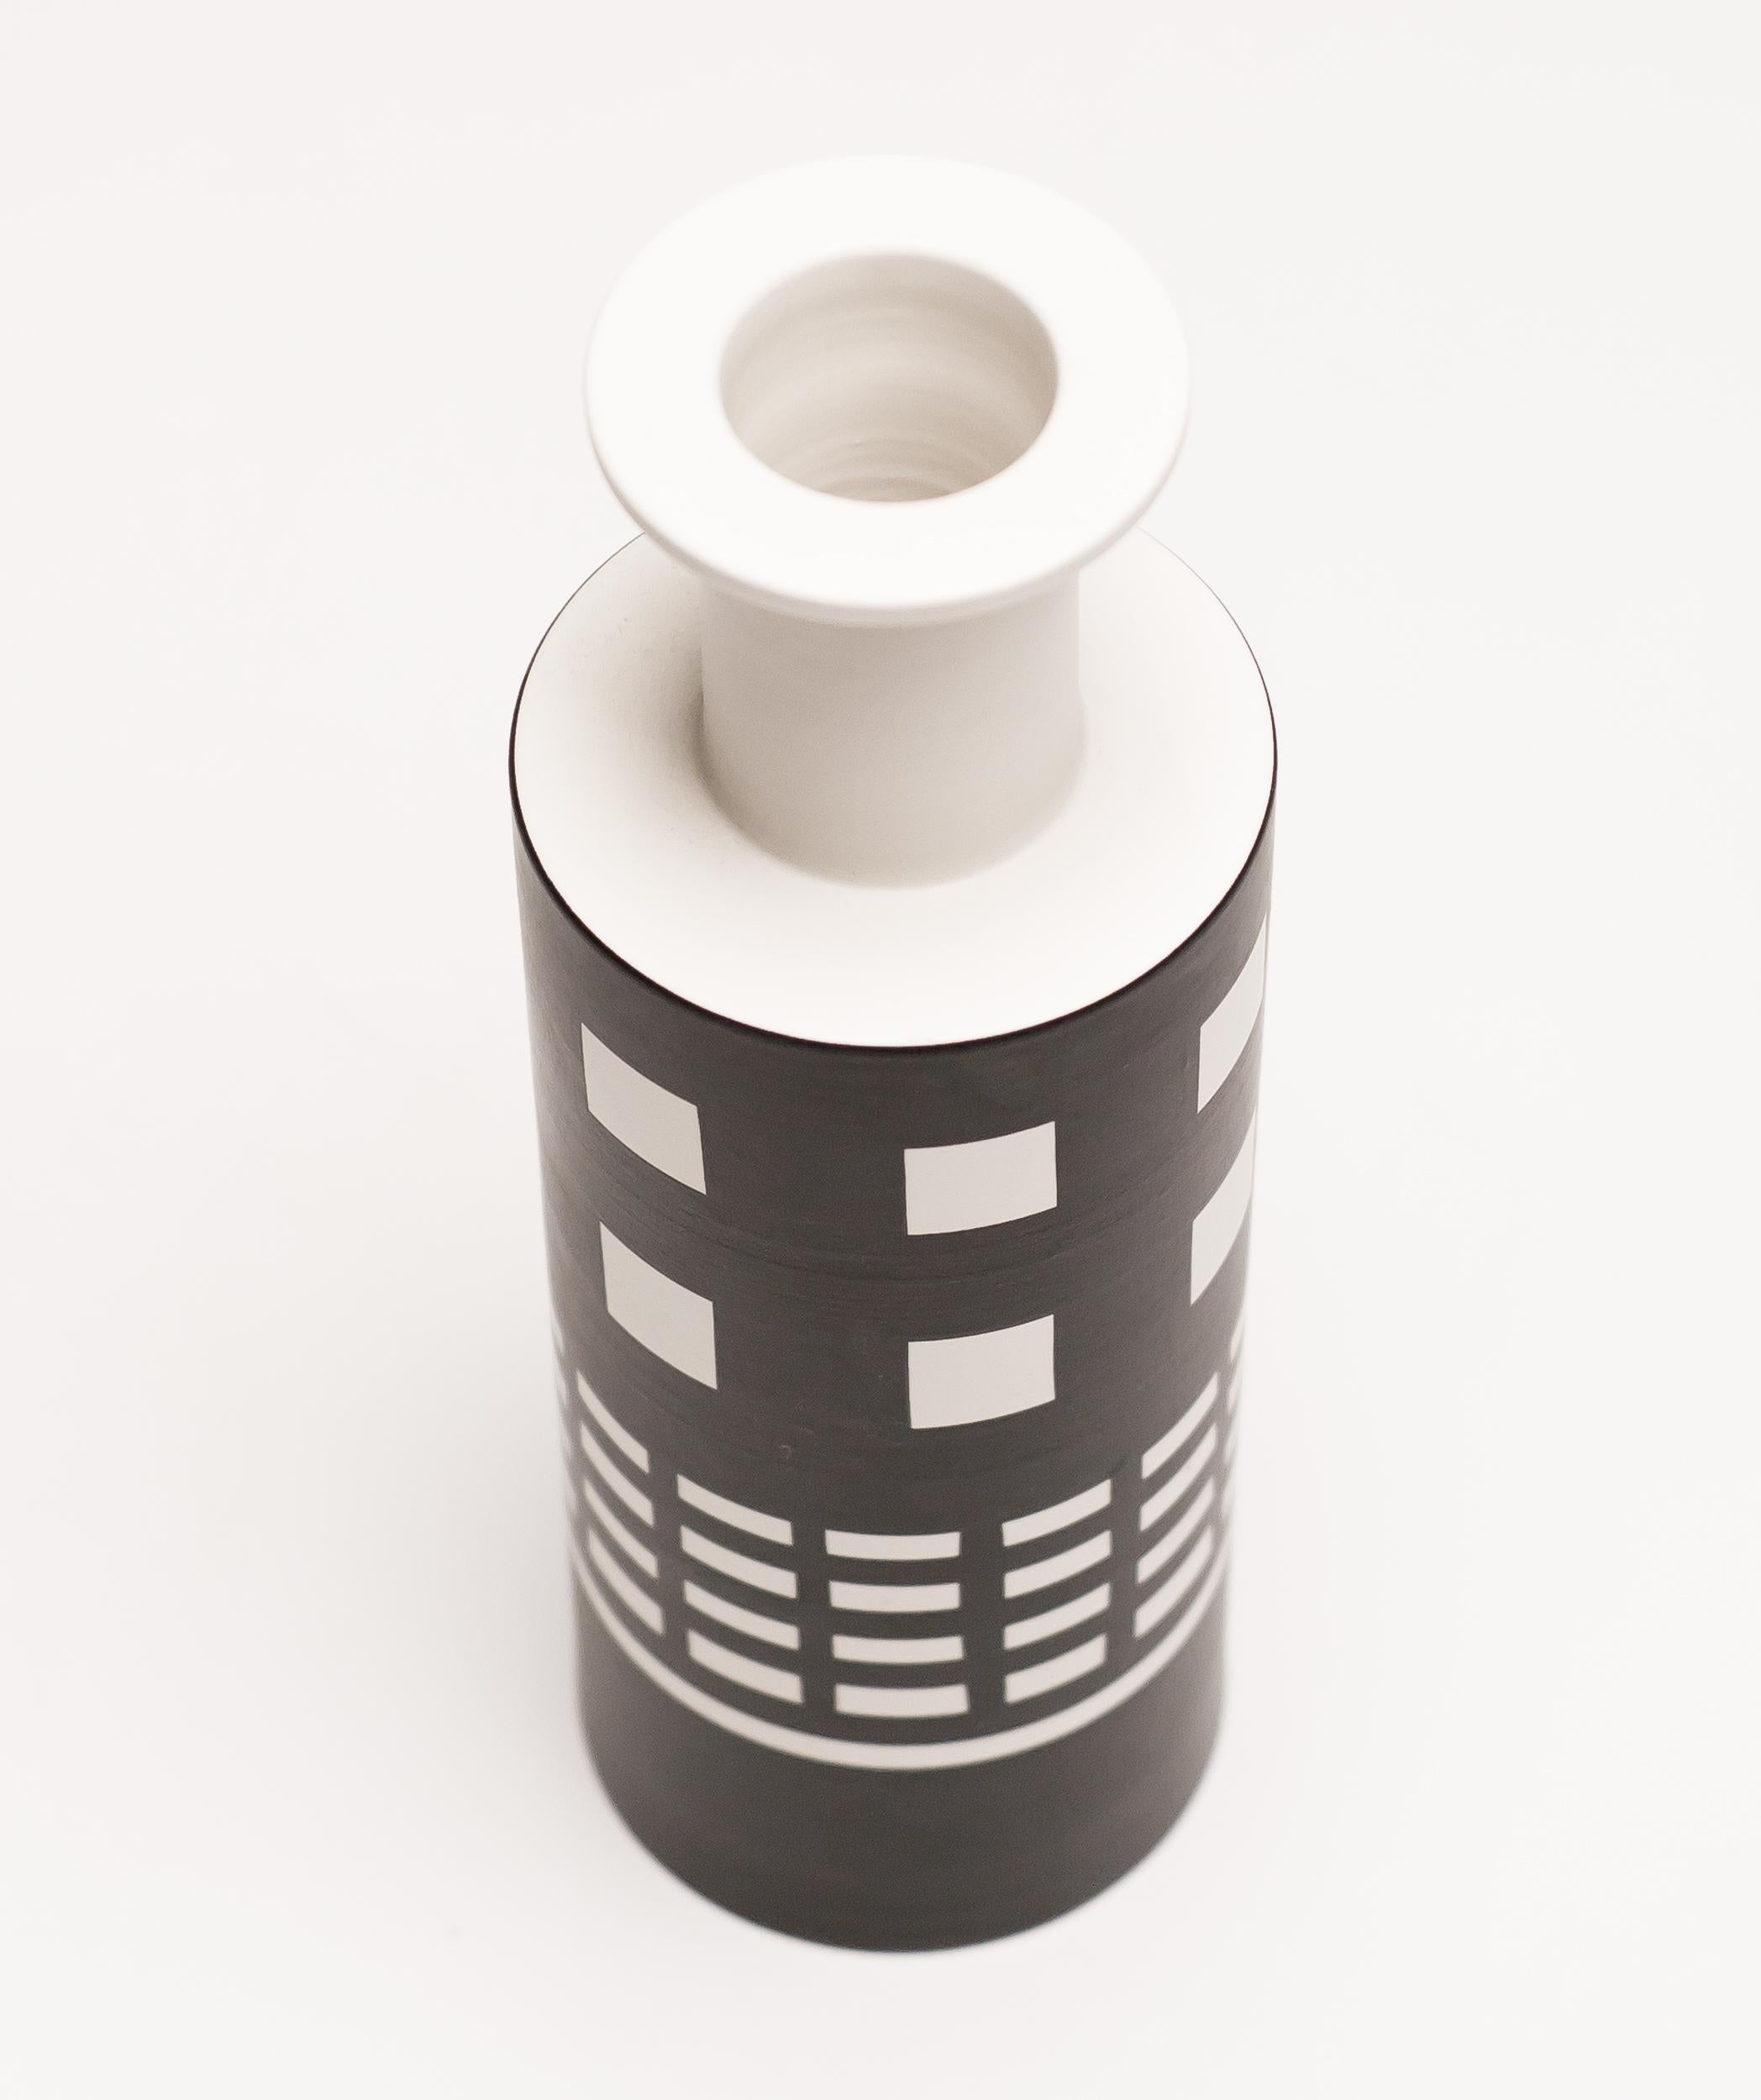 Rocchetto vase designed by Ettore Sottsass and made by Bitossi.
The Rocchetto was originally designed in 1959 and brought back in continuous re-editions, starting in 1982. 
This example was produced, circa 1999. Part of the Hollywood series of